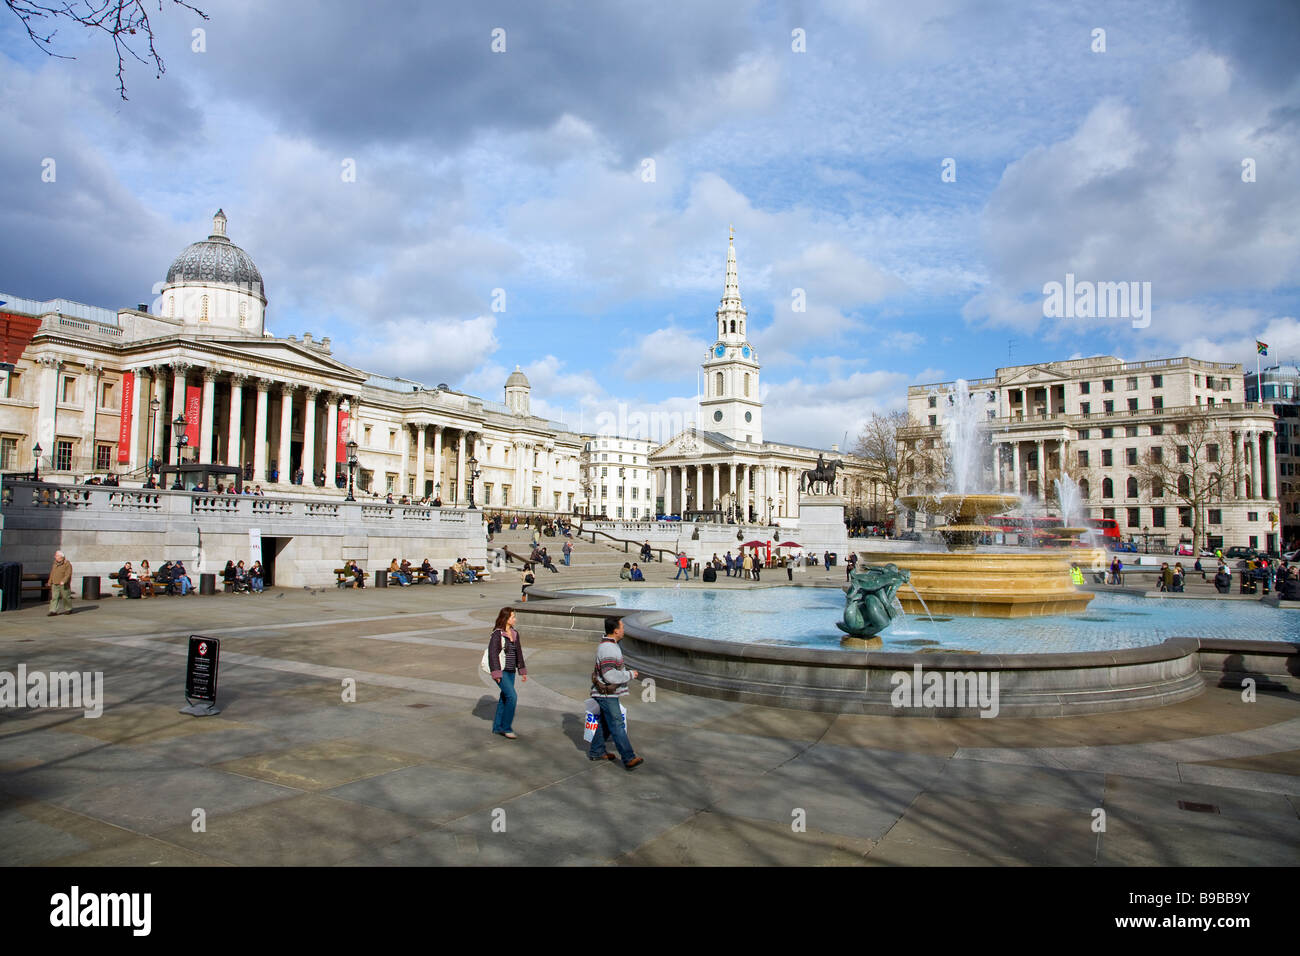 Trafalgar Square National Gallery and St Martin-in-the-Fields Church London England Great Britain United Kingdom UK GB Stock Photo